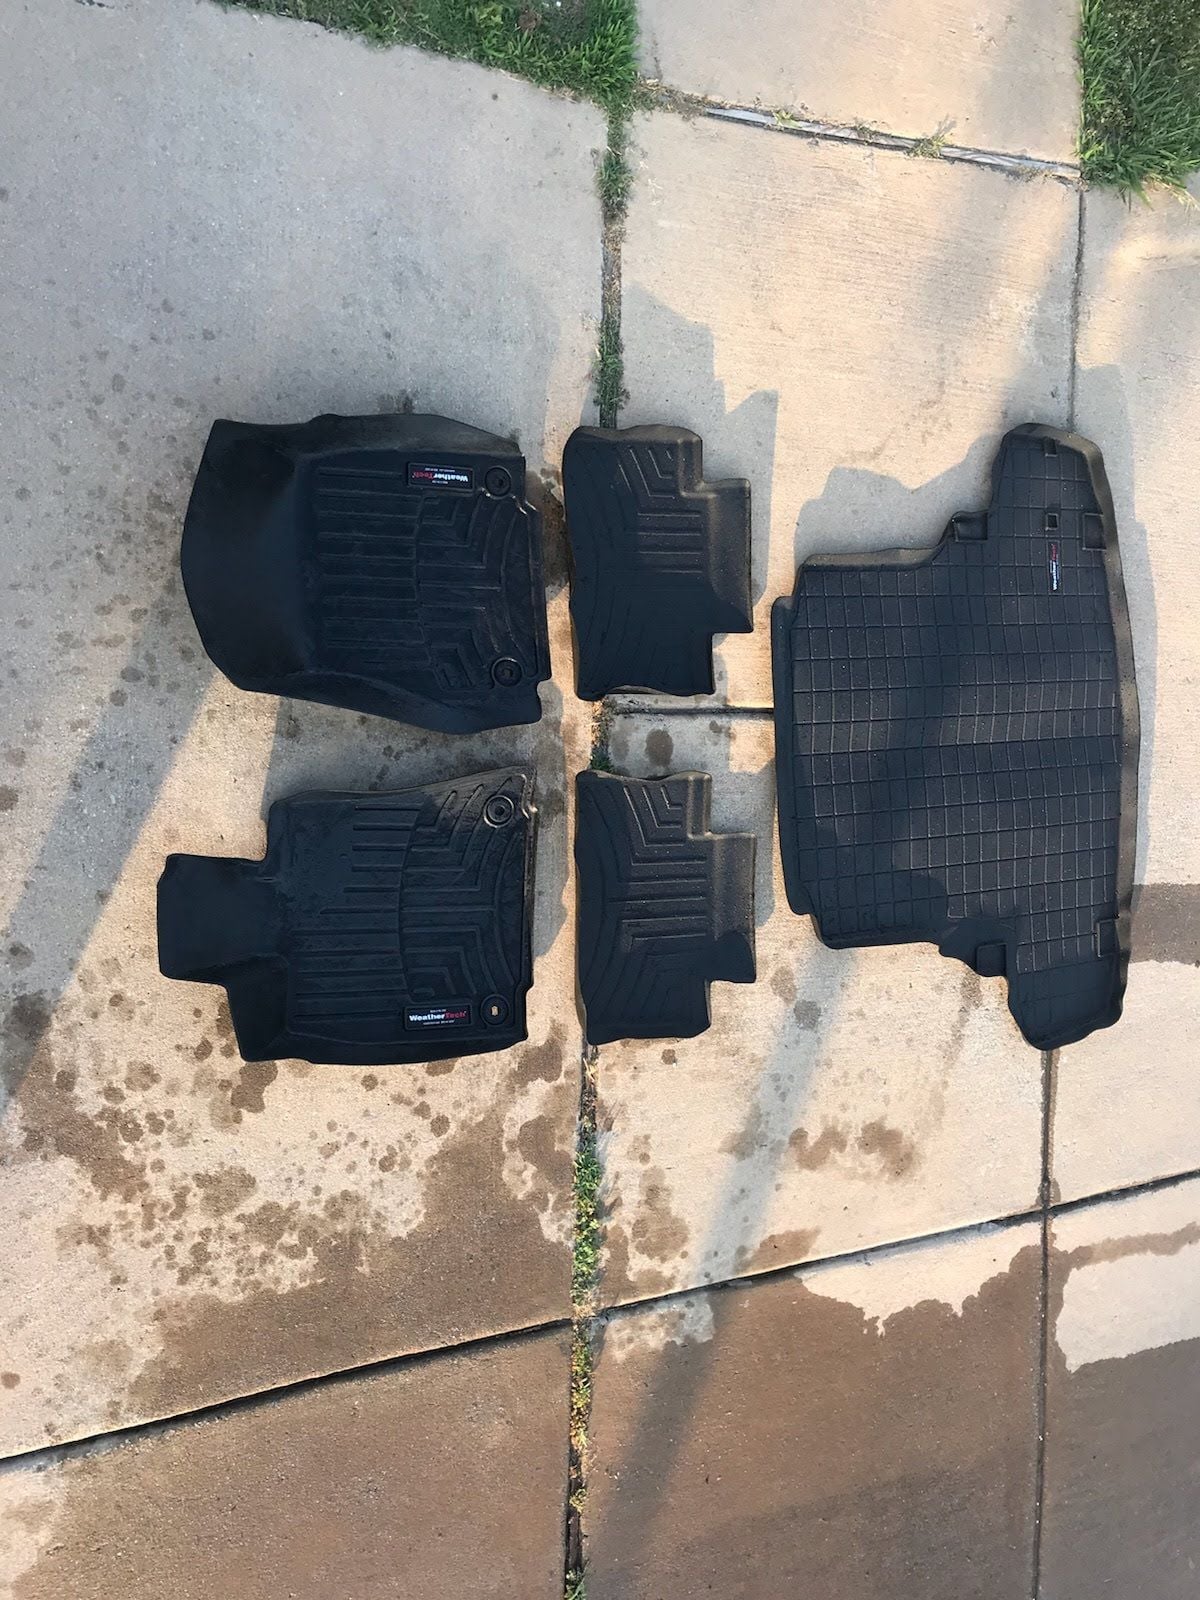 Interior/Upholstery - Gently used 3IS WeatherTech - Used - 2014 to 2019 Lexus IS250 - 2016 to 2019 Lexus IS200t - 2014 to 2019 Lexus IS350 - 2016 to 2019 Lexus IS300 - Irving, TX 75063, United States